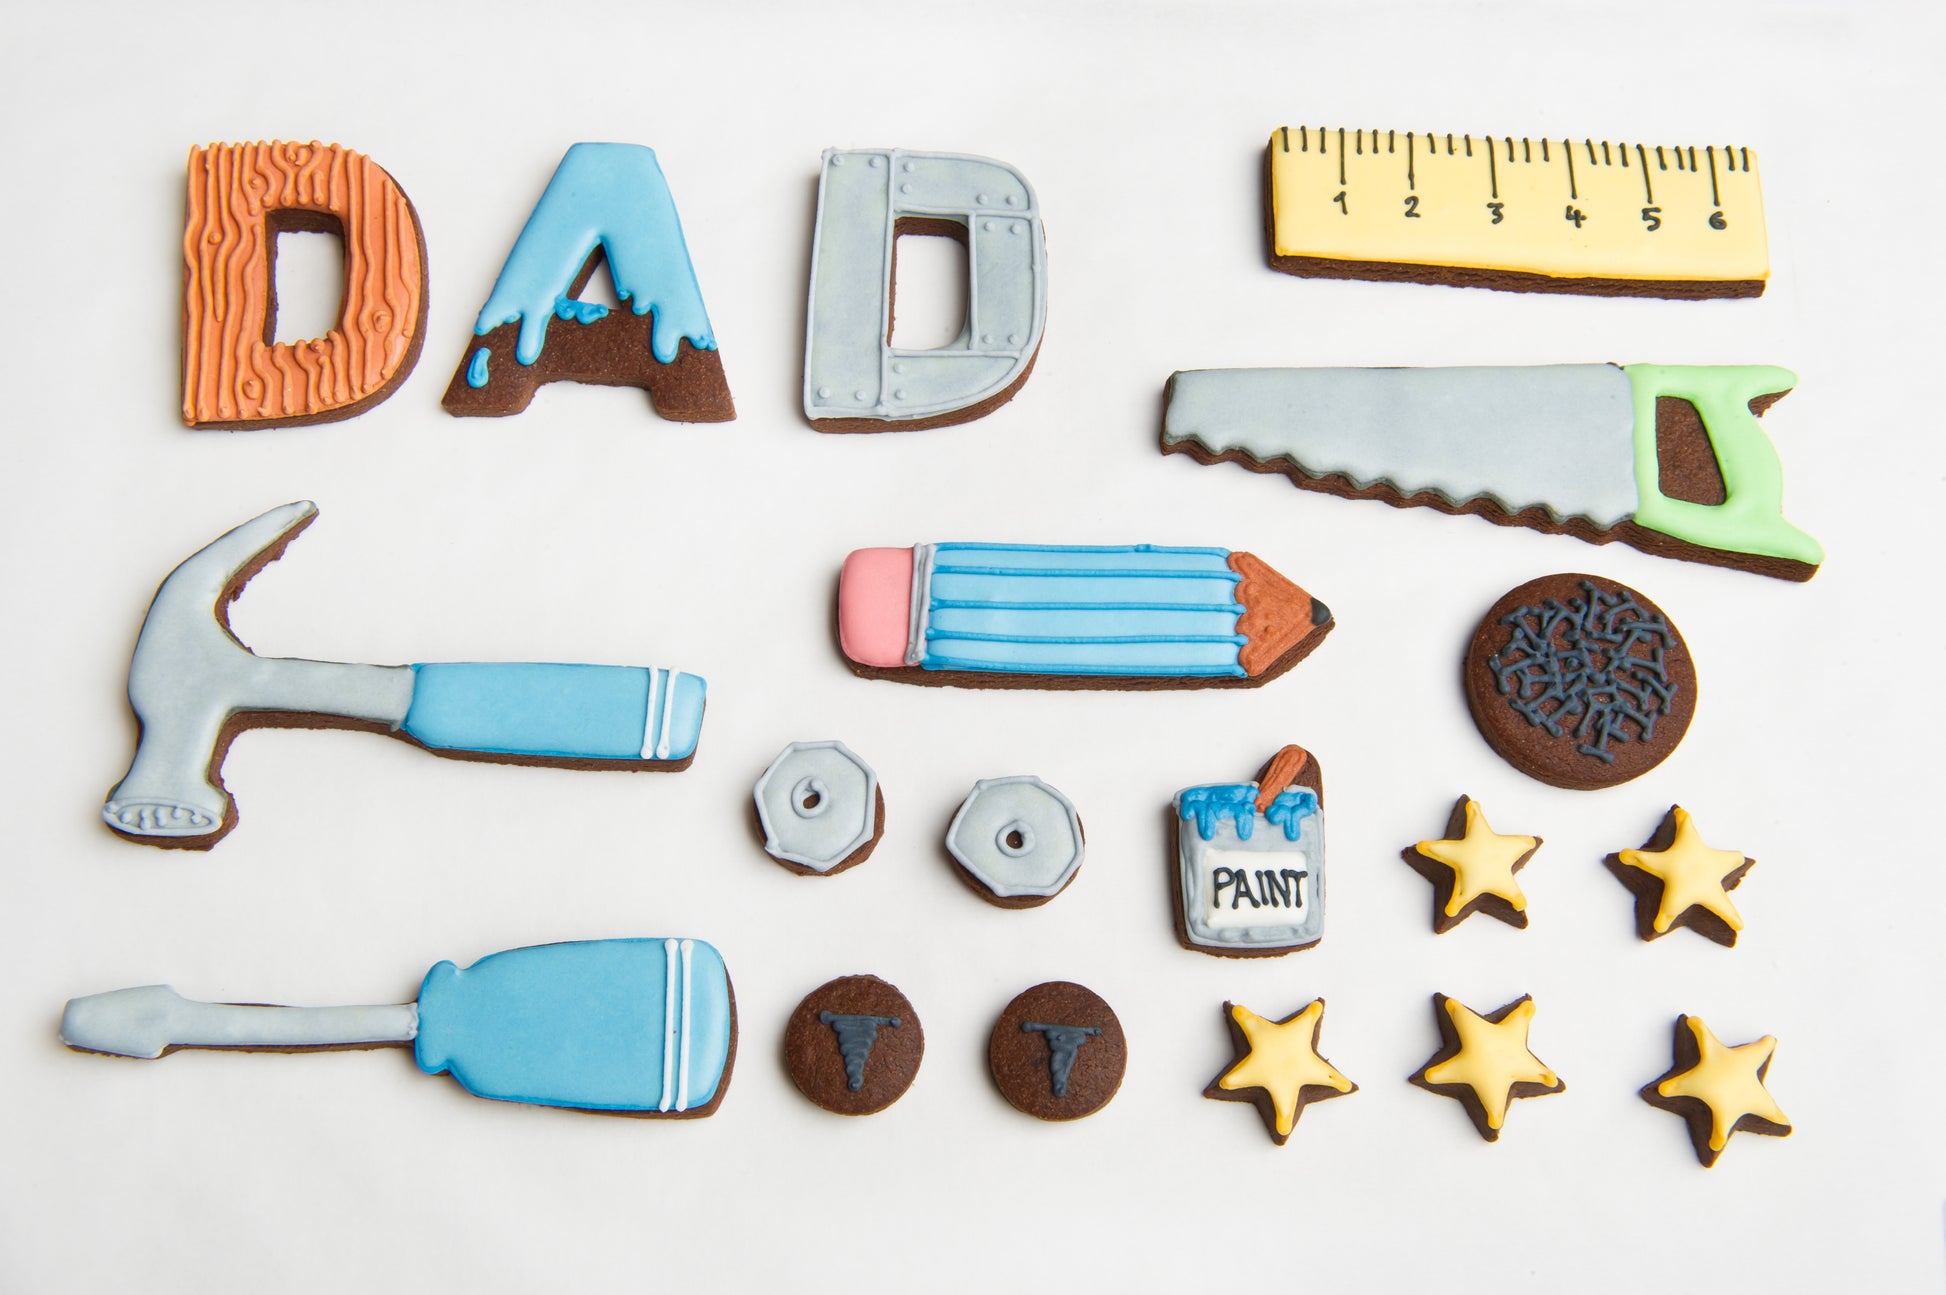 layout image of the biscuits included in the fathers day diy tin. biscuit hammer, cookie screwdriver.